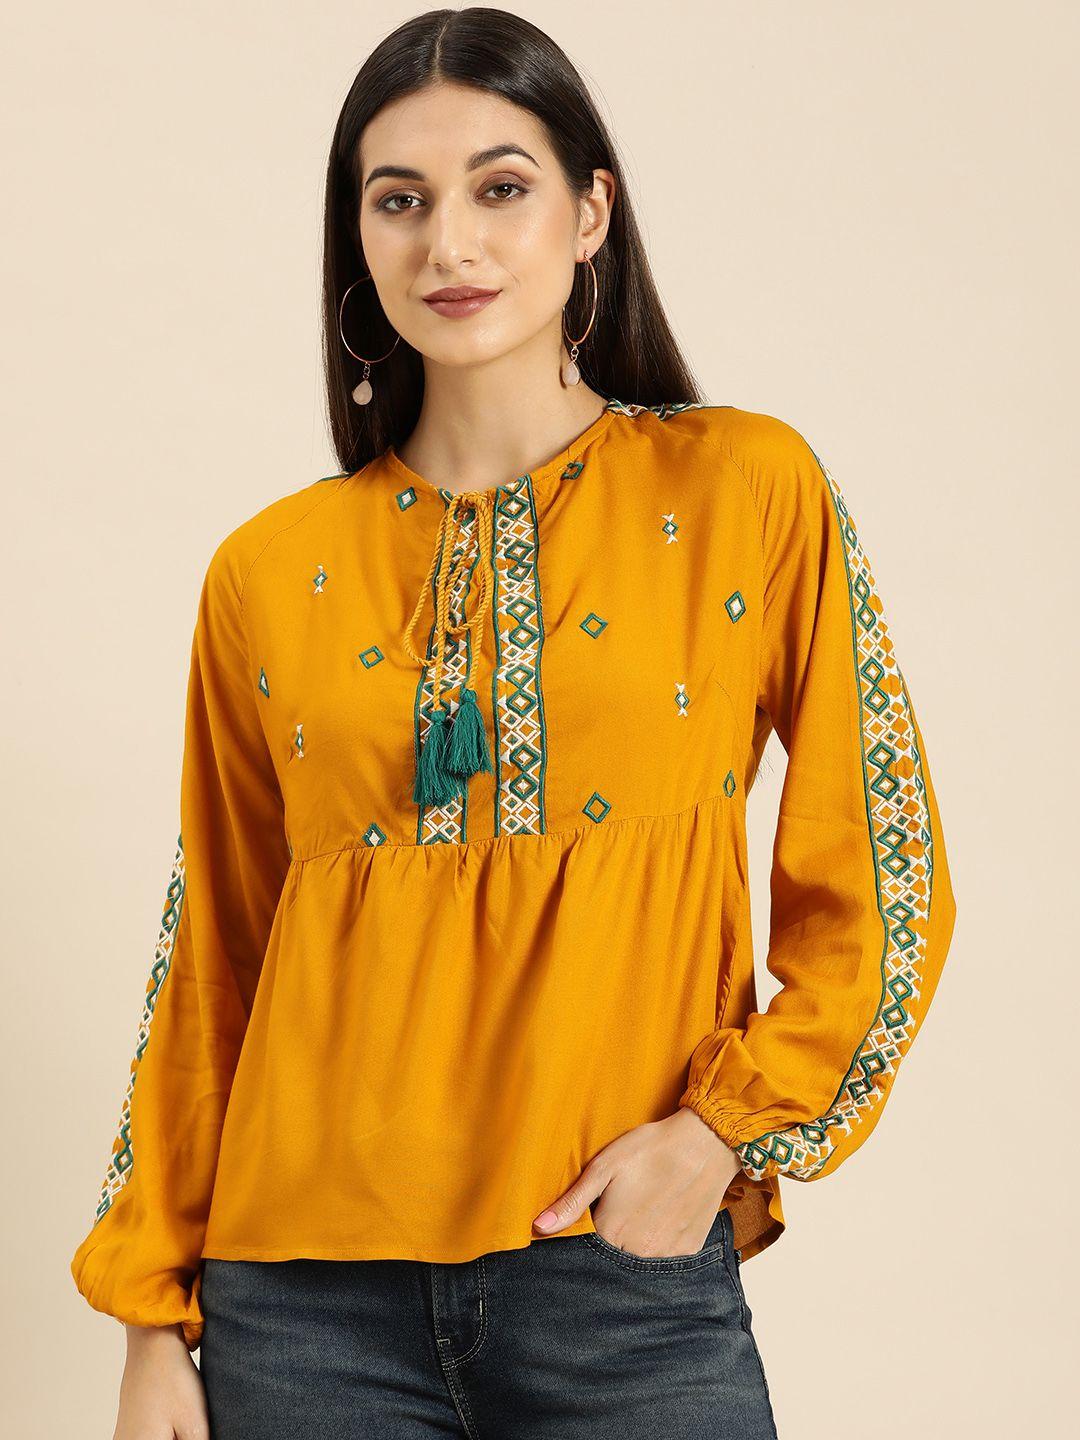 all-about-you-mustard-yellow-geometric-embroidered-peplum-top-with-long-puff-sleeves